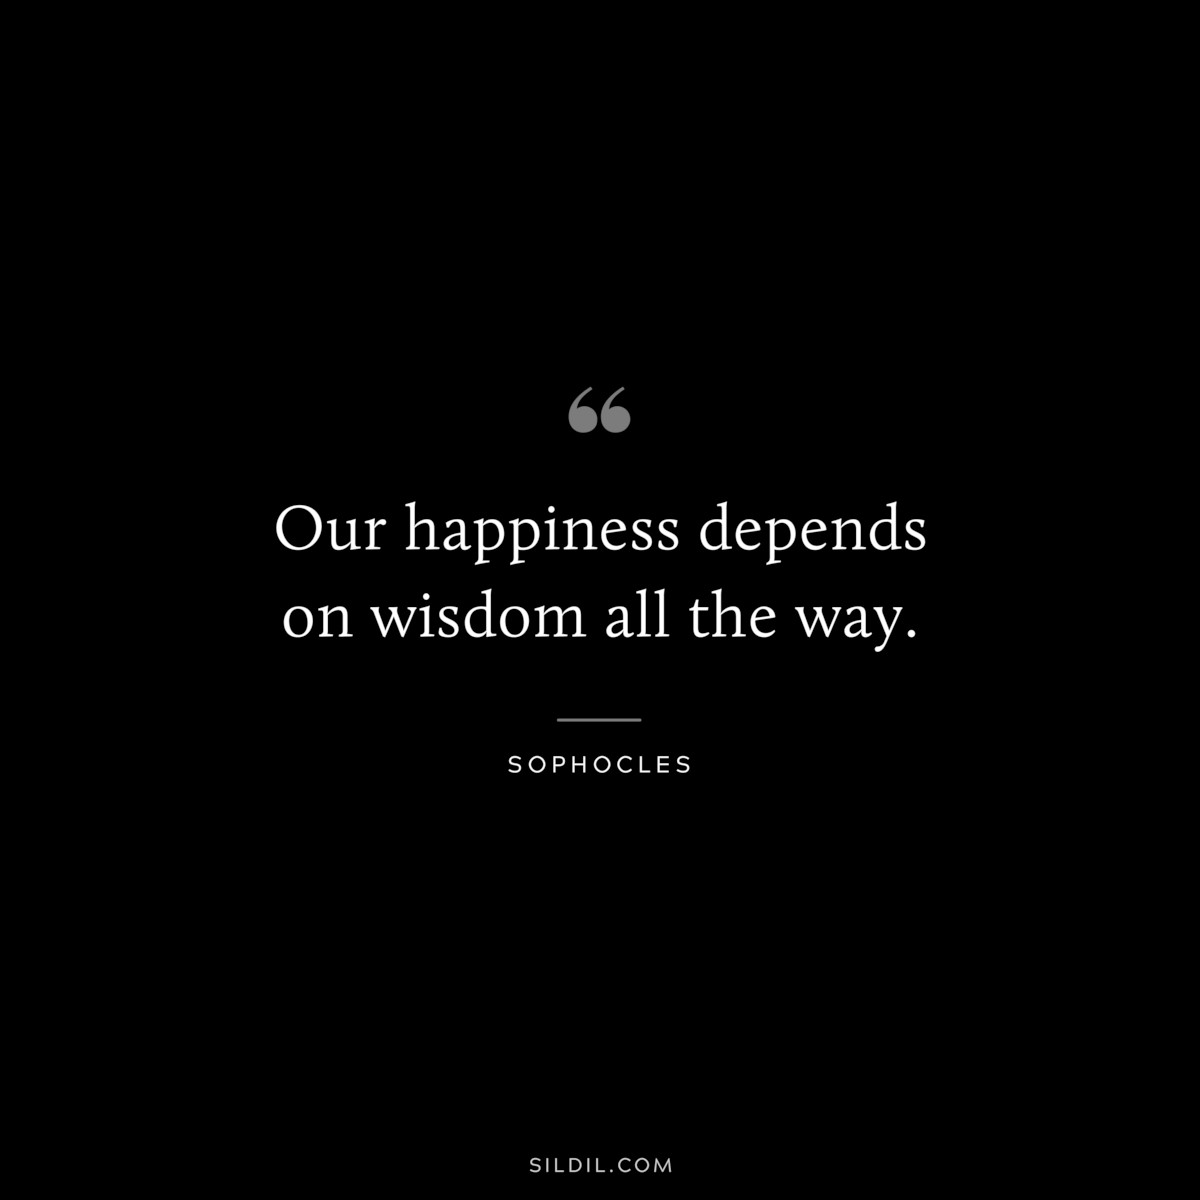 Our happiness depends on wisdom all the way. ― Sophocles